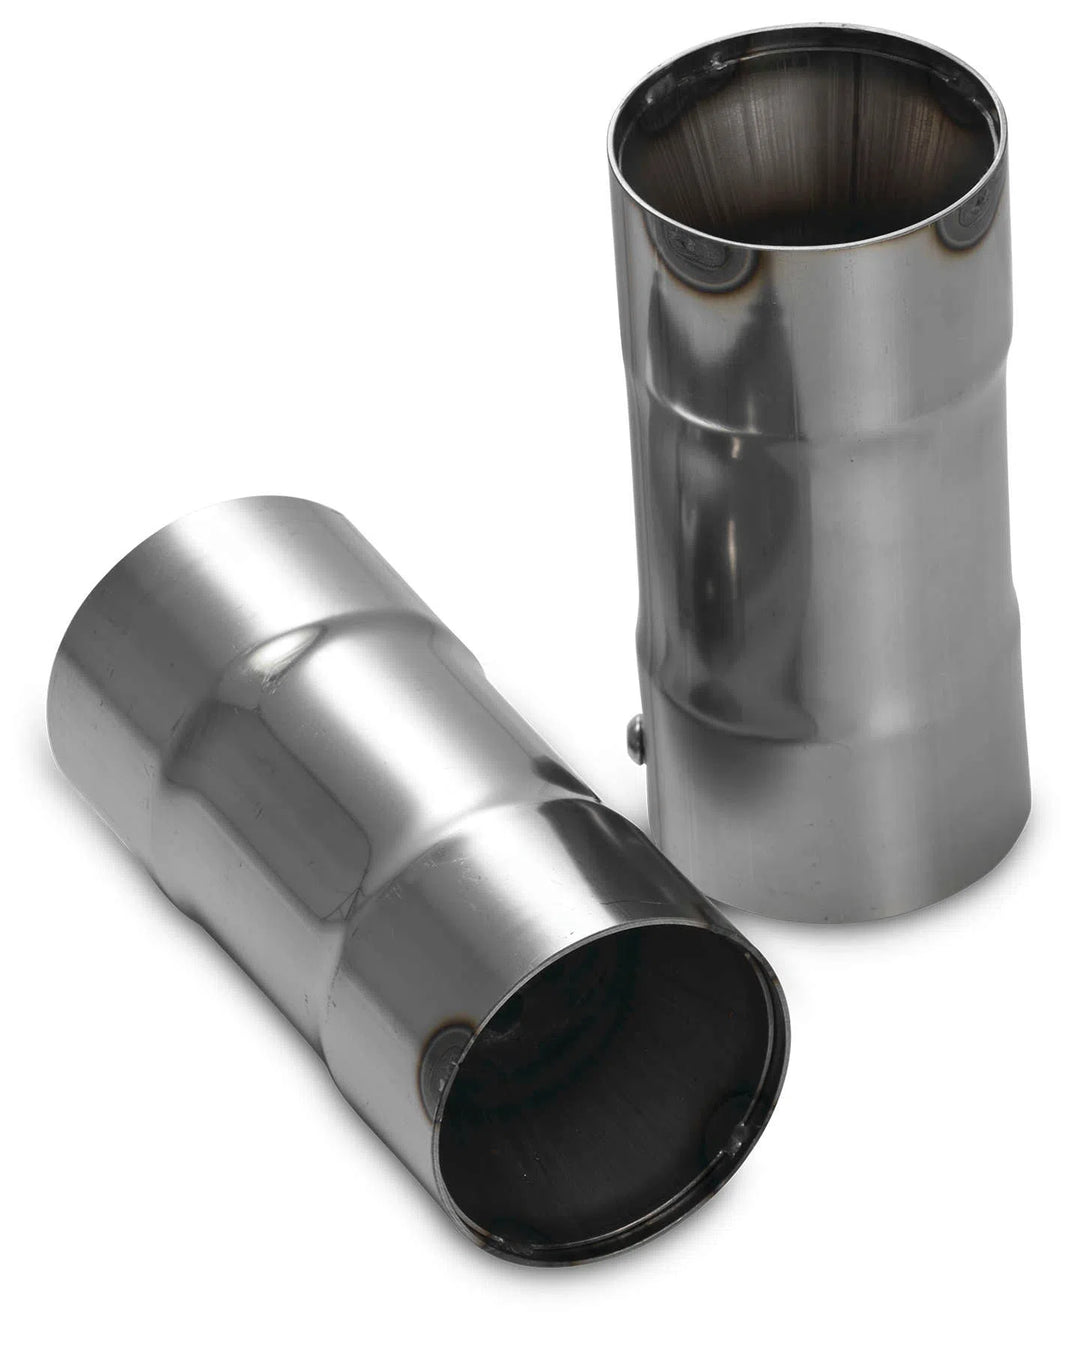 Vance & Hines 21905 Quiet Baffle for Hi-Output Pipes and Slip-Ons